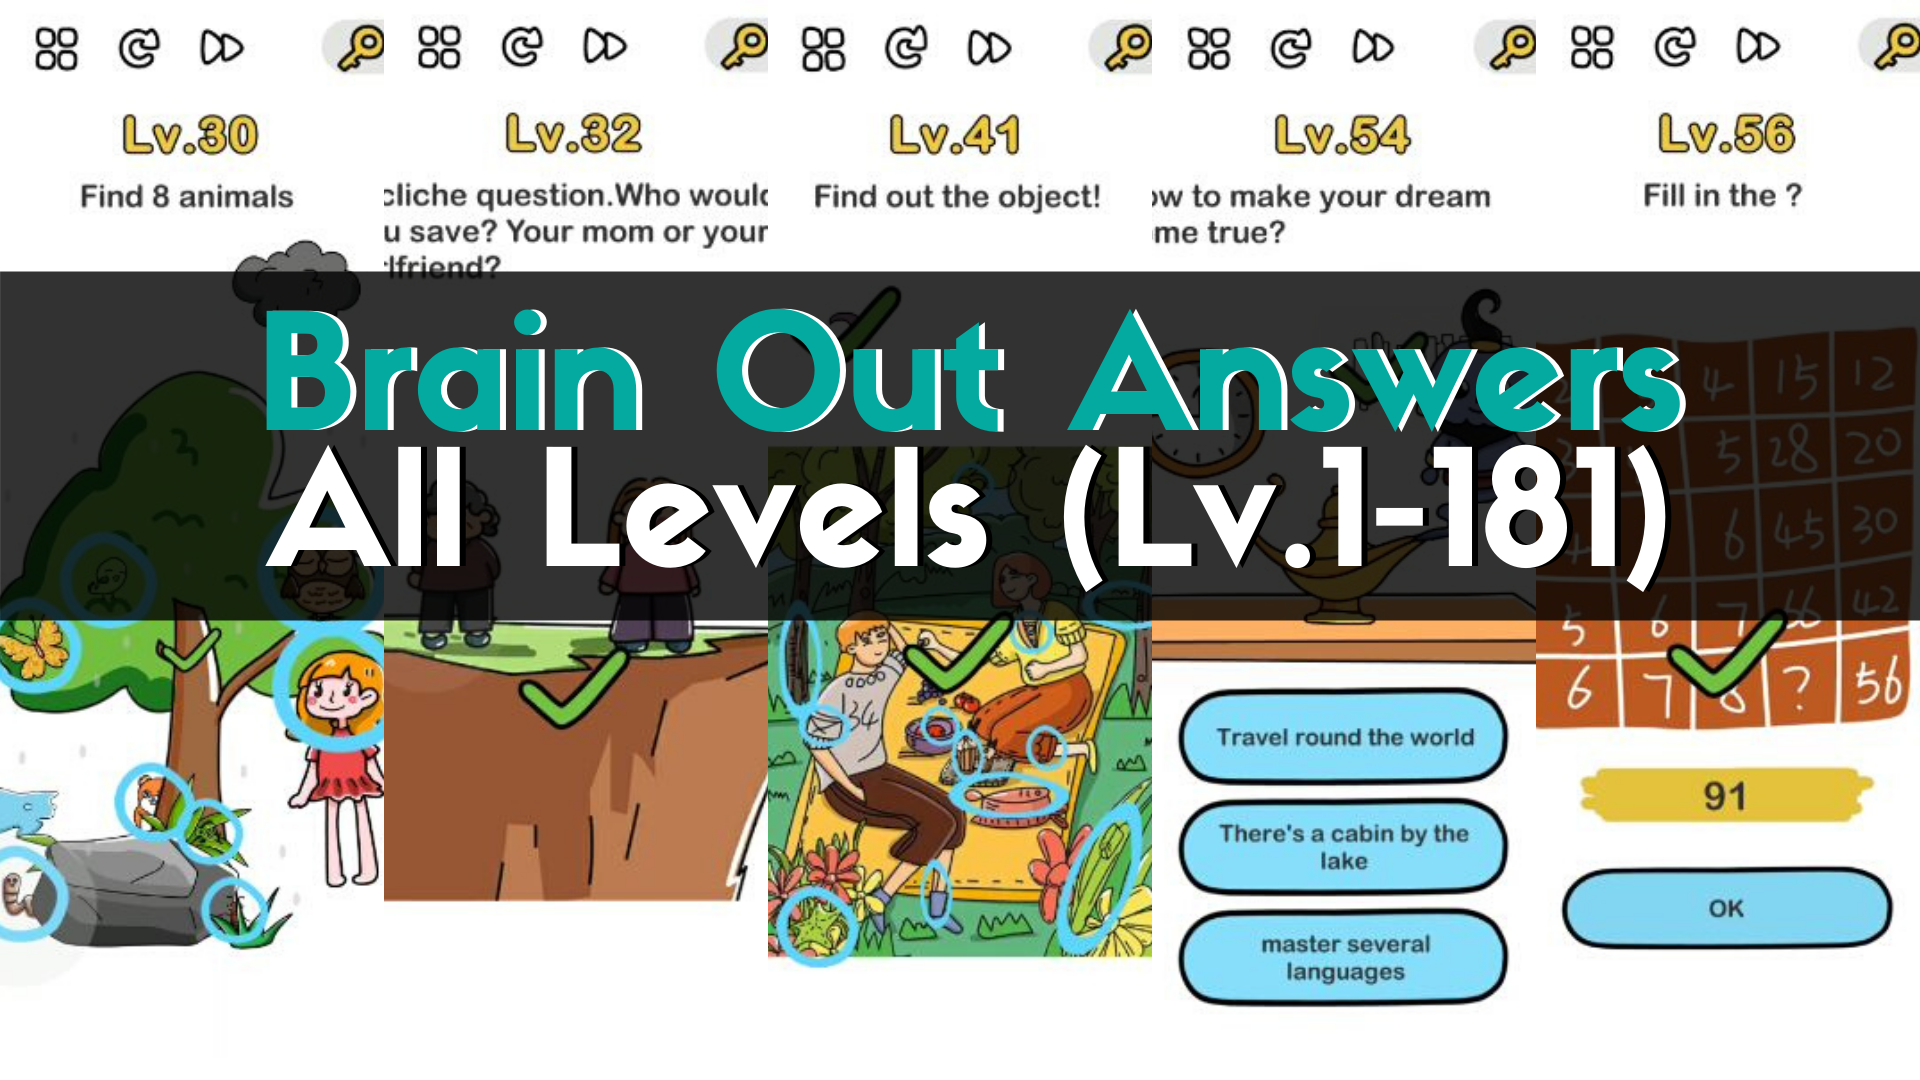 Brain Out Answers All Levels (Lv. 1-181)